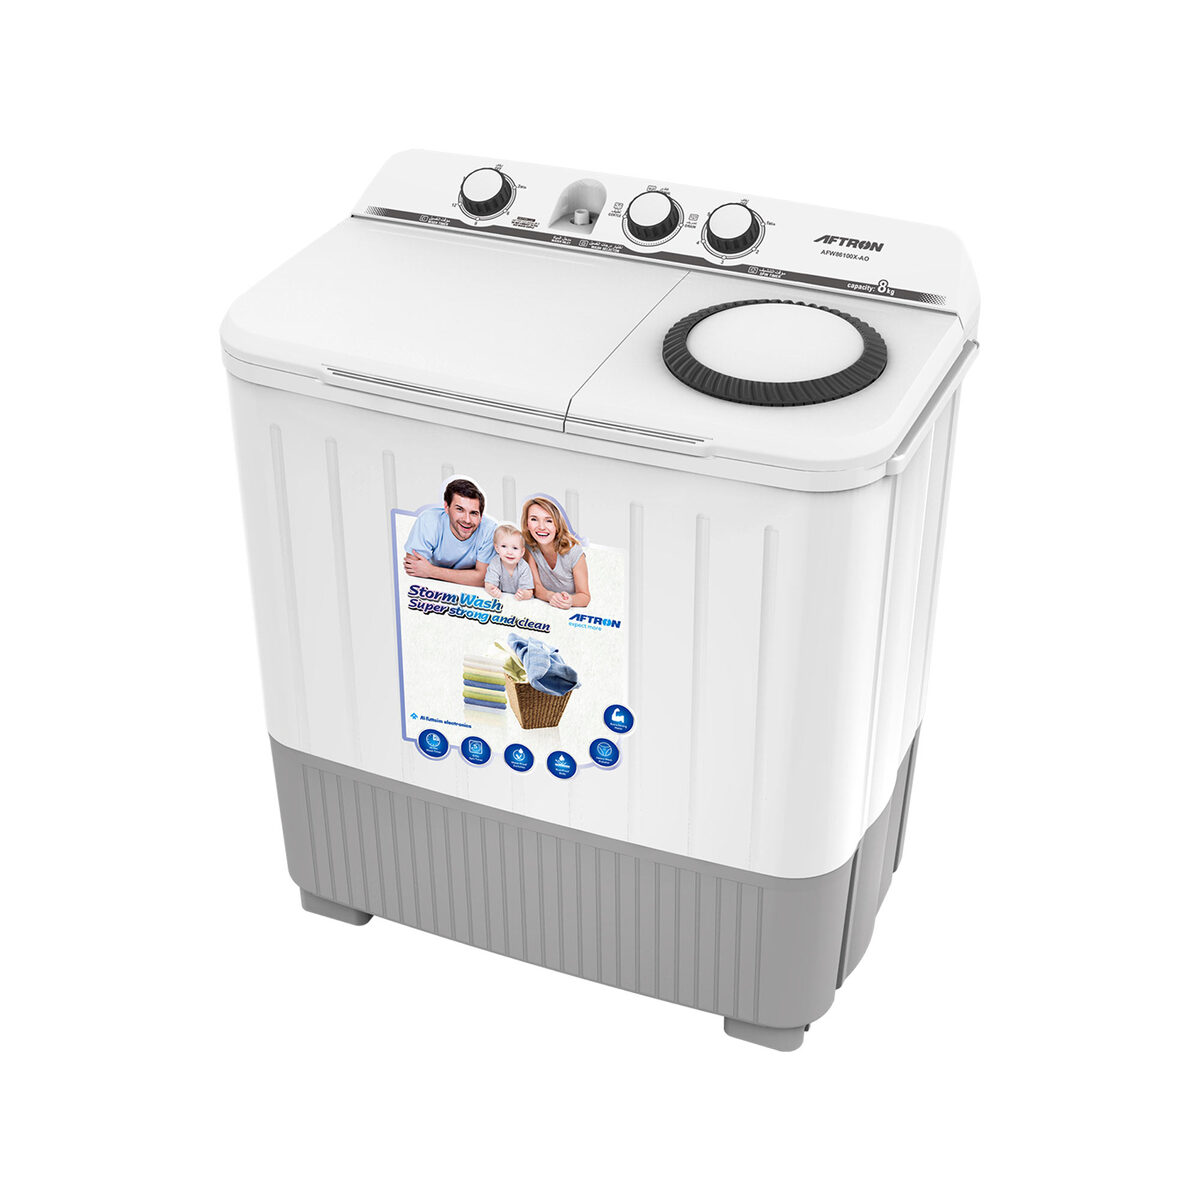 Aftron Top Load Semi Automatic Washing Machine, 8 kg, White, AFW86100X-AO